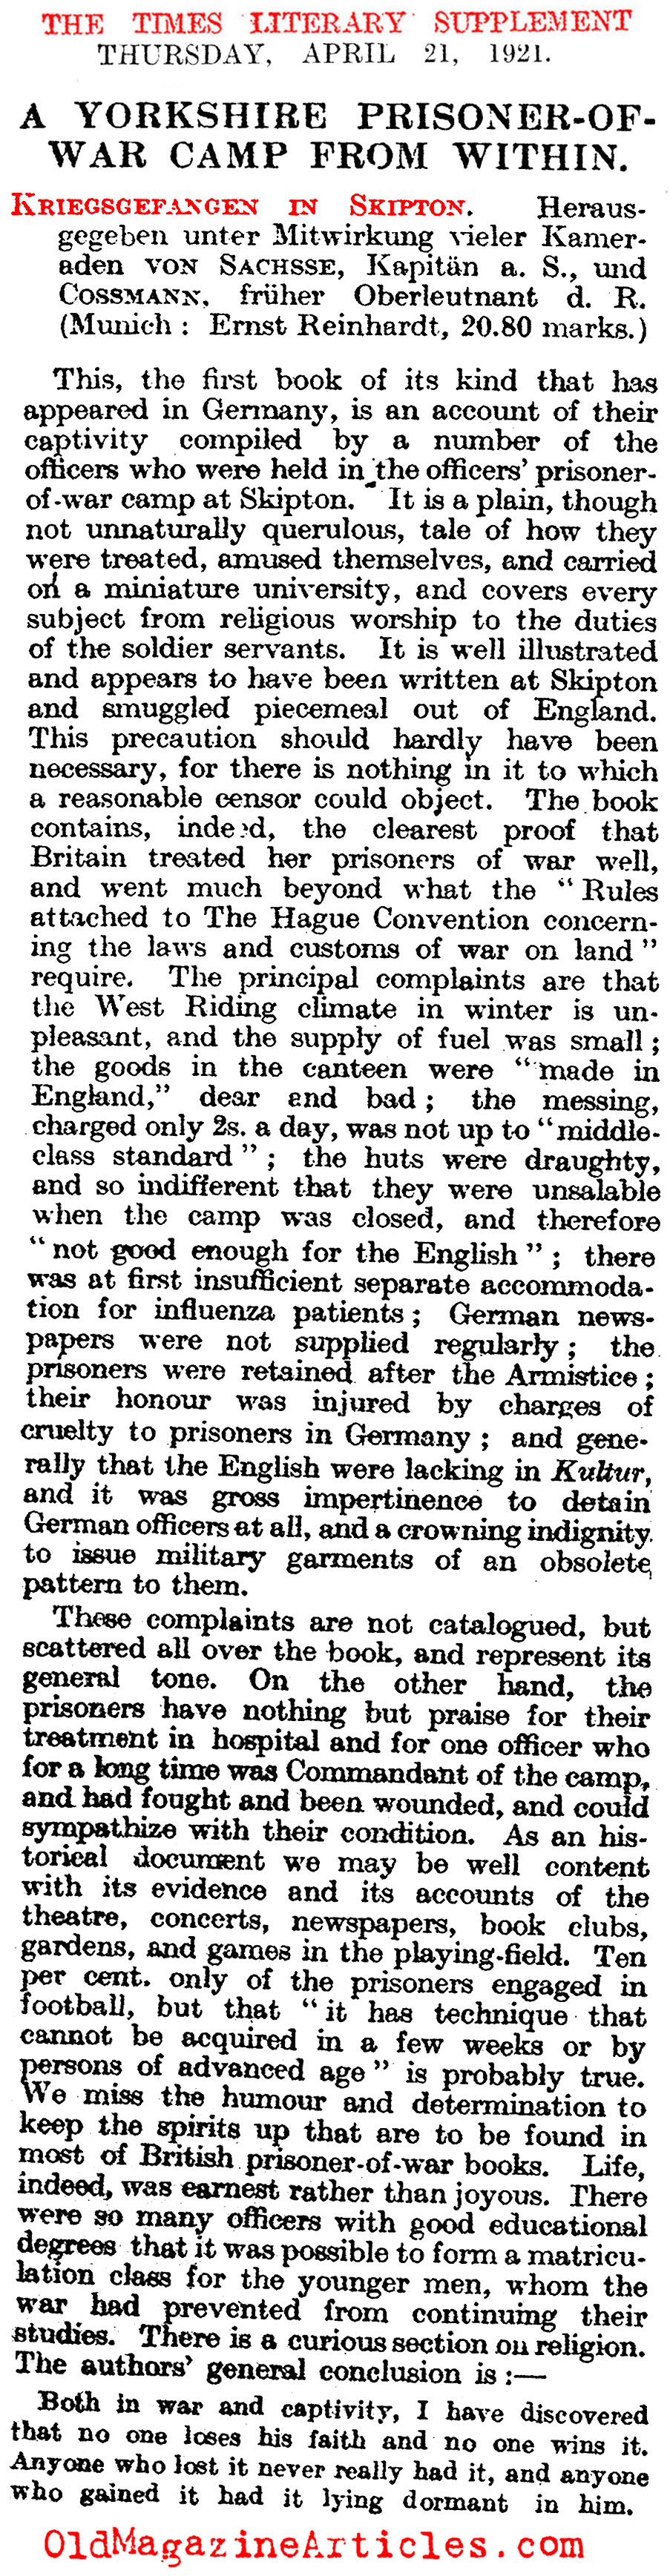 German Officers Recall Their Days as P.O.W.s  (Times Literary Supplement, 1921)